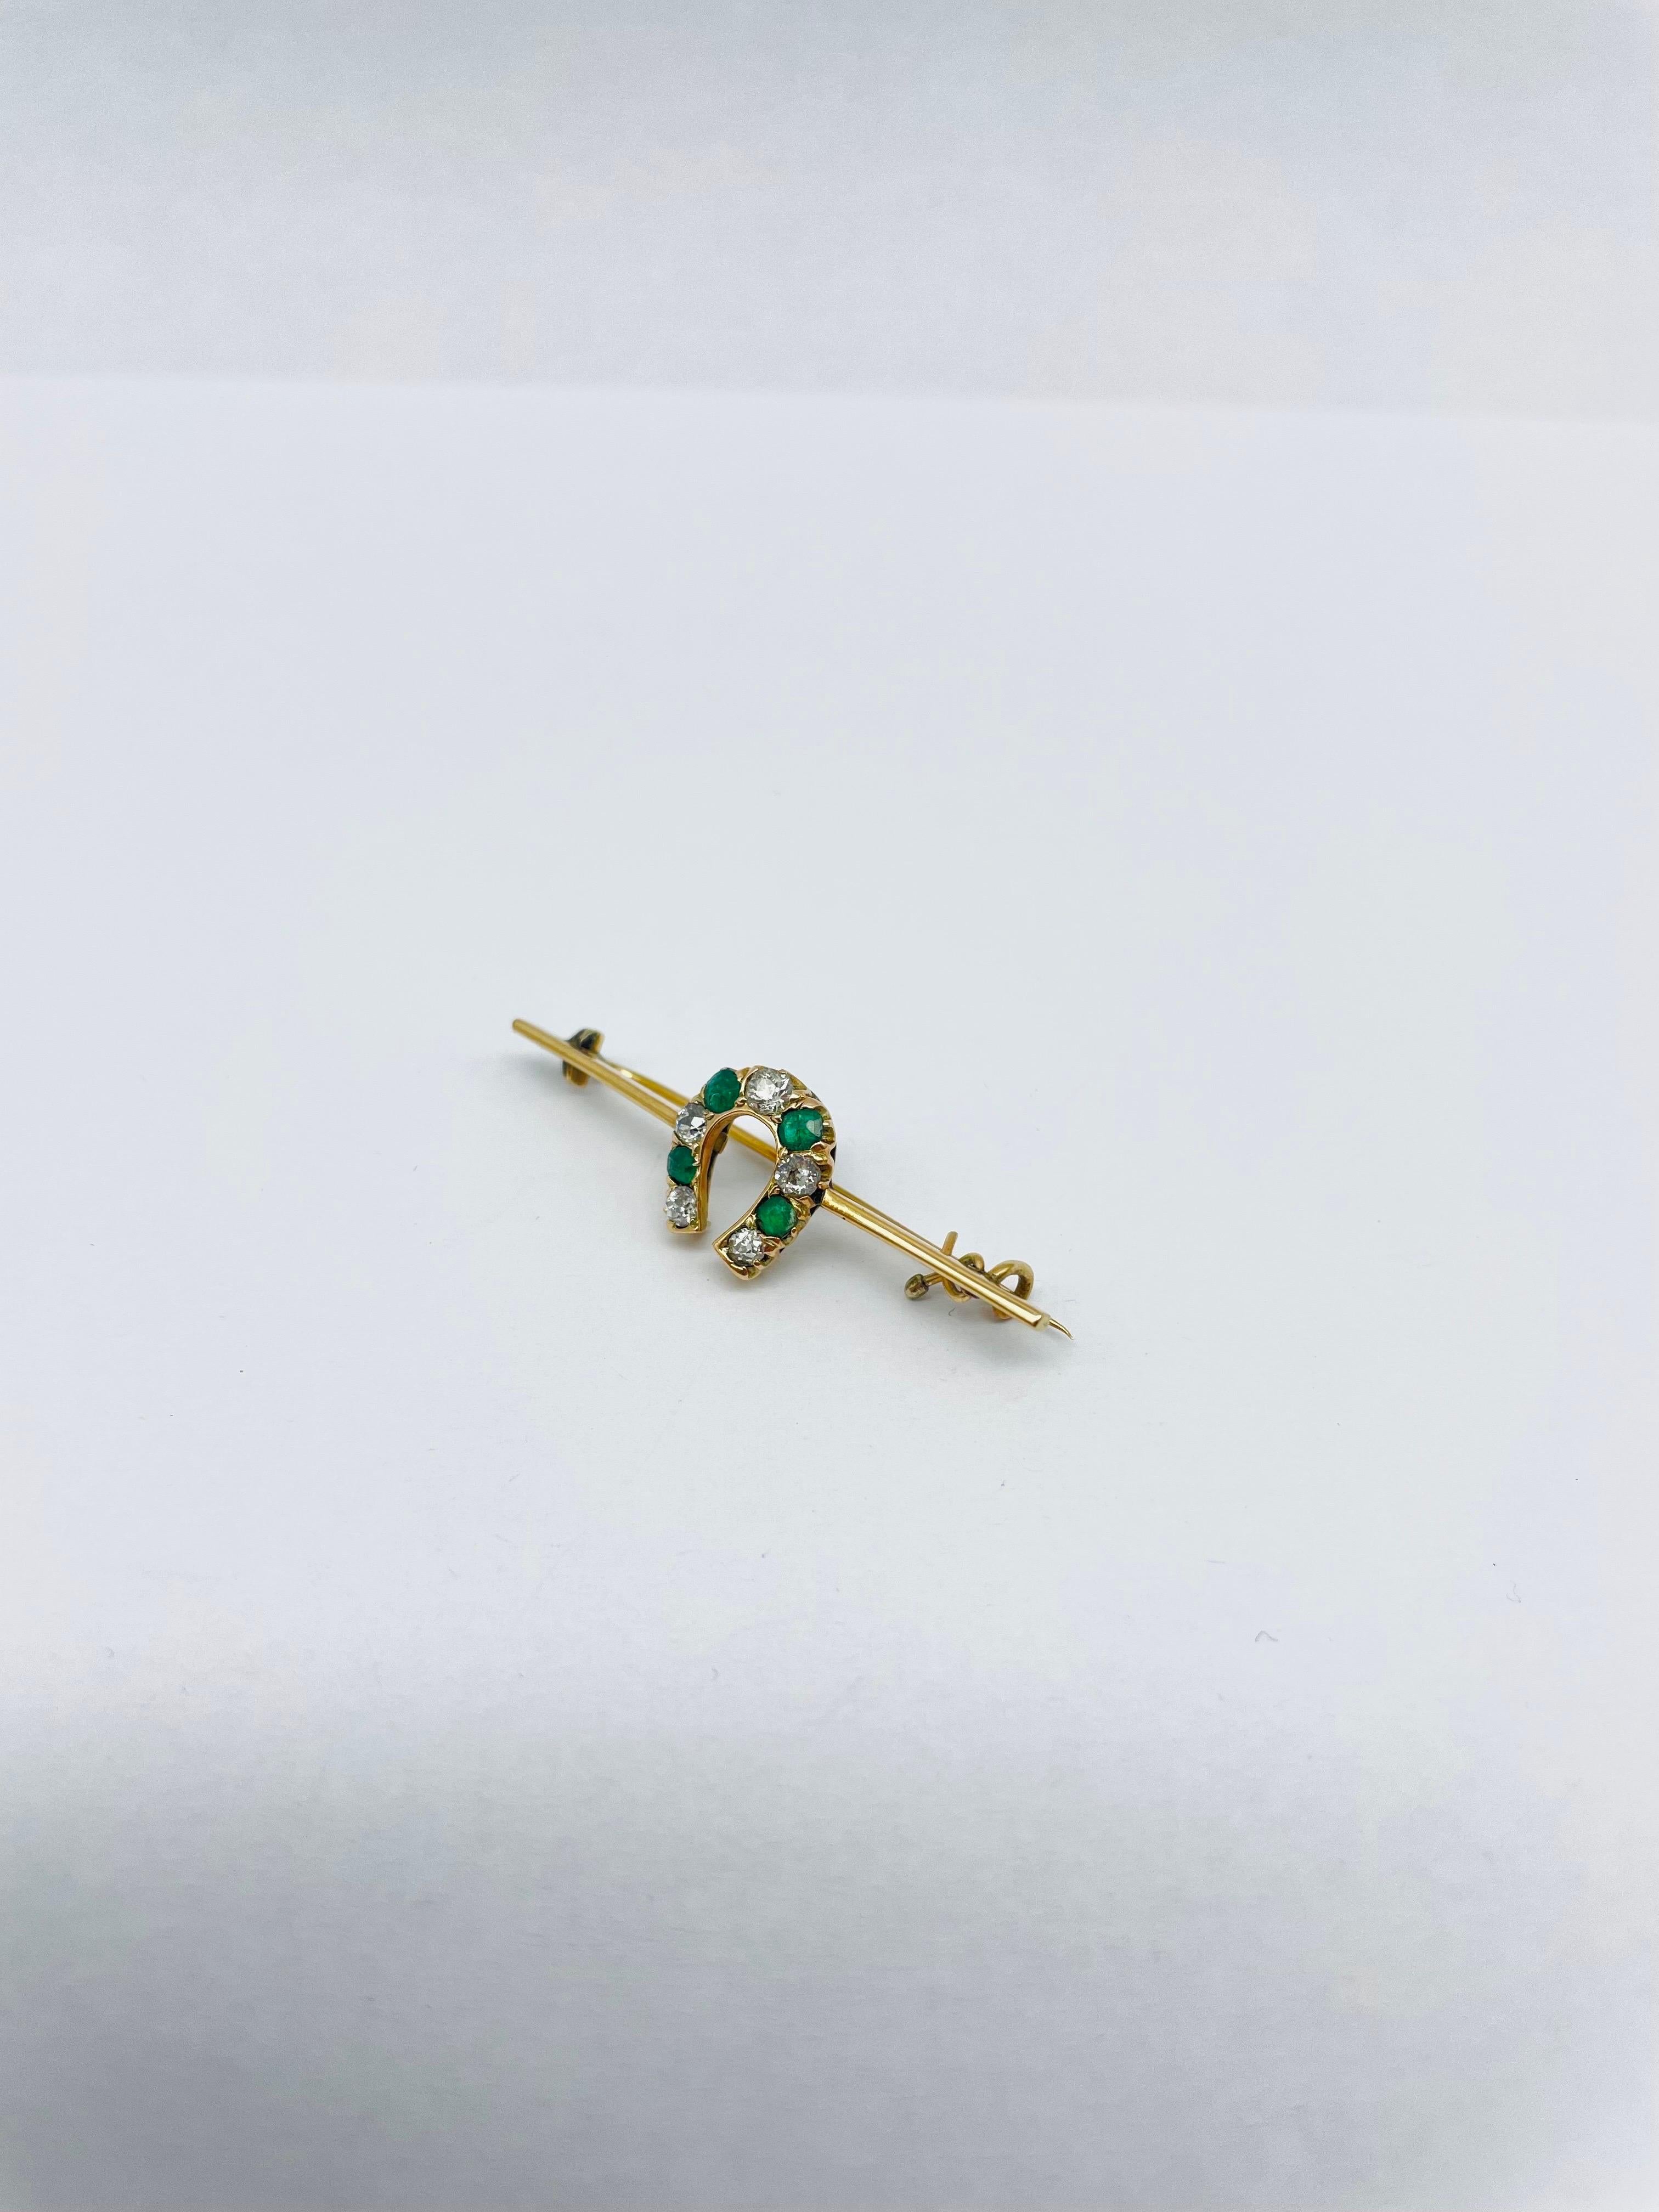 Horseshoe Bar Brooch with Diamonds and Emerald - a beautiful and elegant piece of jewelry that is sure to turn heads and capture attention. Crafted from 14k yellow gold with a finely worked design, this brooch is a true testament to the skill and